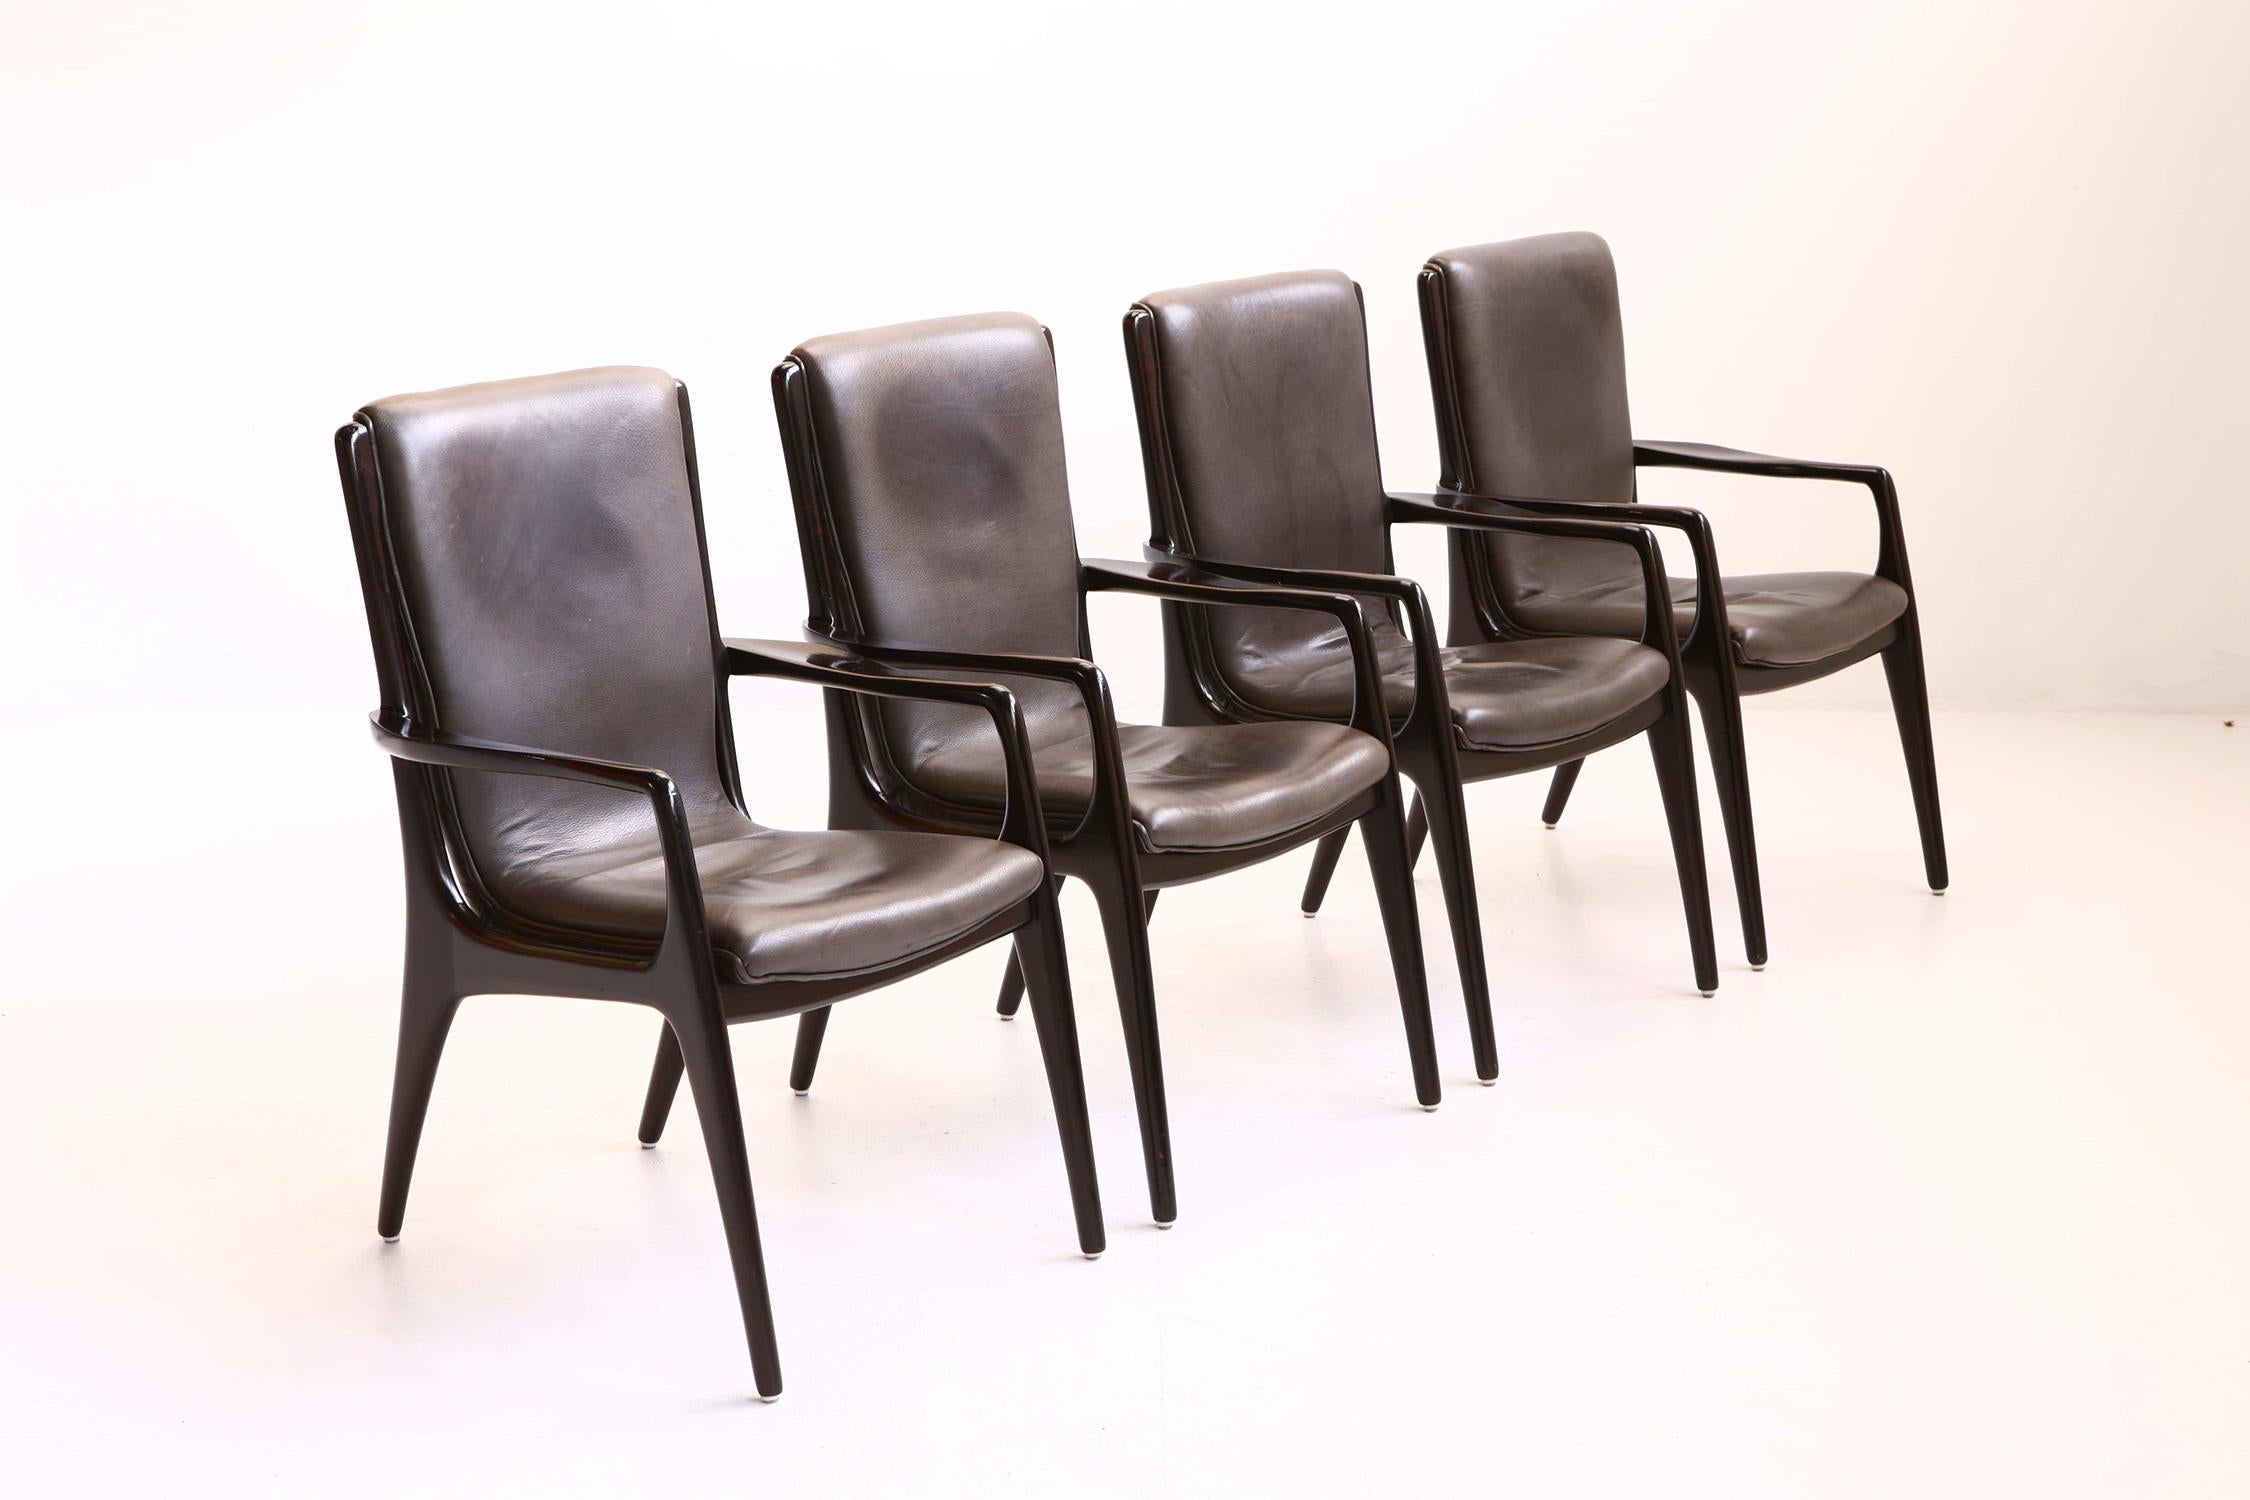 Vladimir Kagan’s work was known for his organic shapes and superior craftsmanship and these chairs are infused with his eye for design and his demand for comfort.

History: Vladimir Kagan was born on 29 August 1927 in Worms, Germany. The son of a